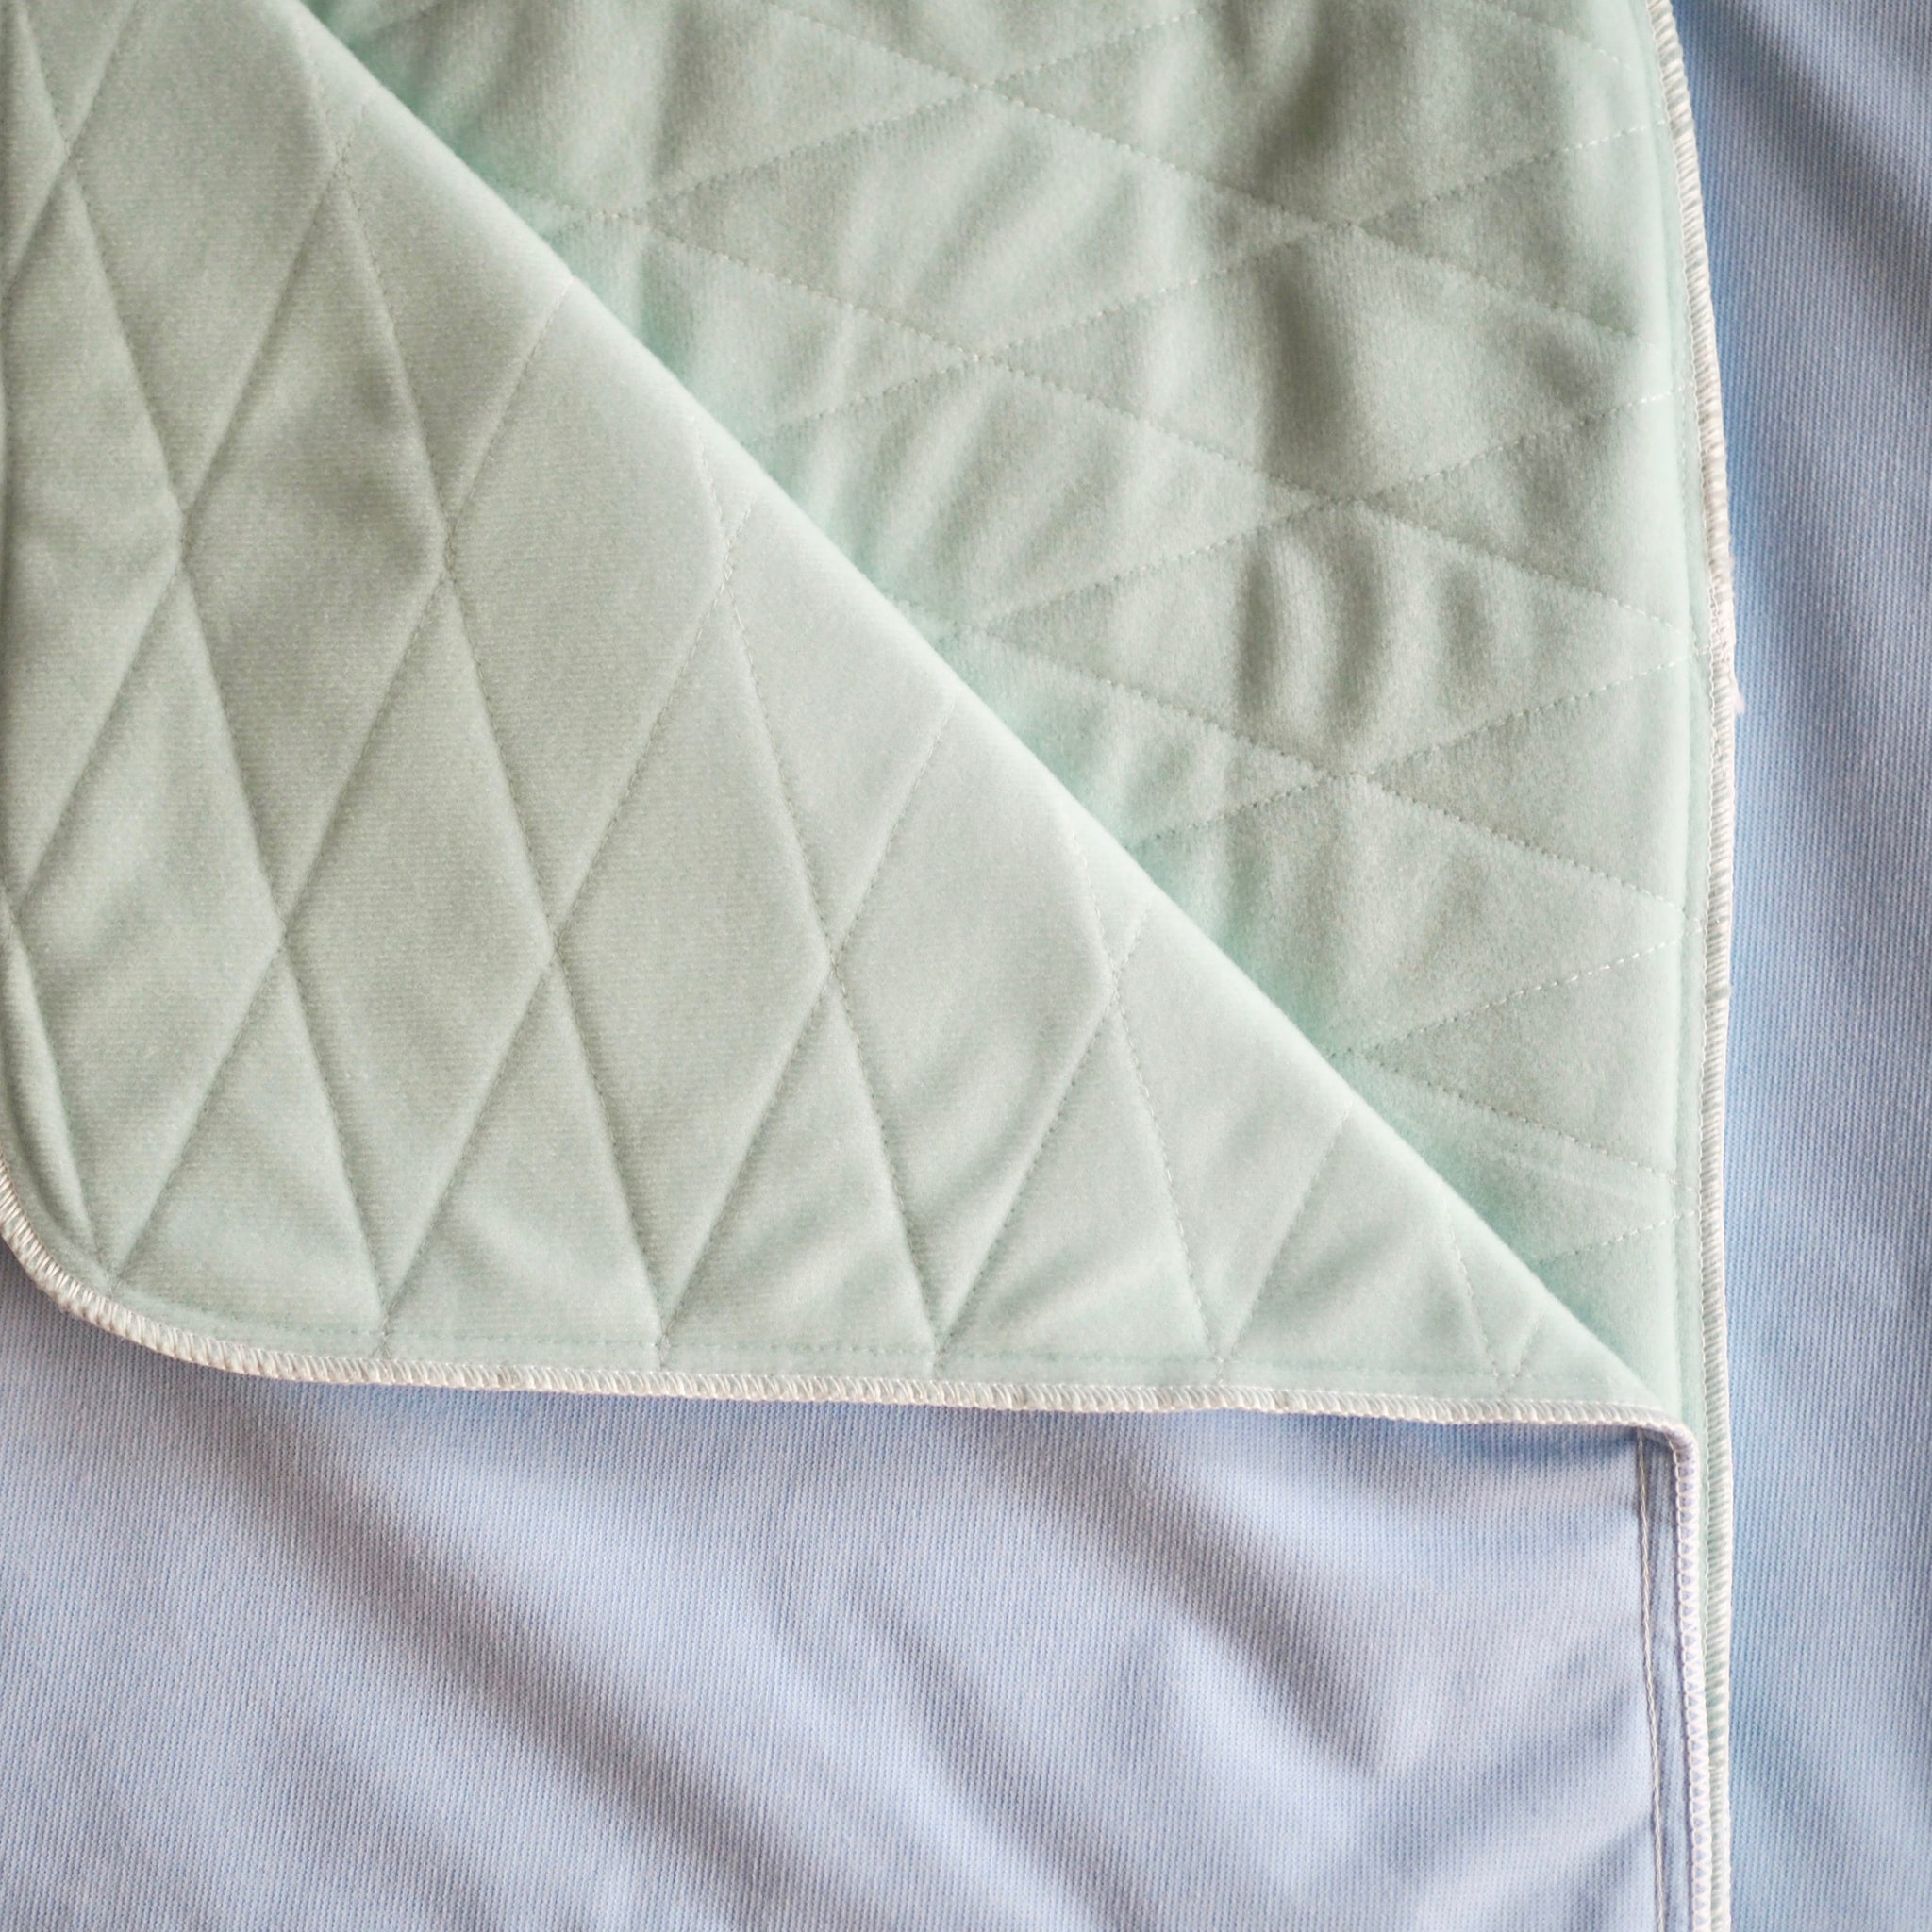 waterproof bed pads for toddlers